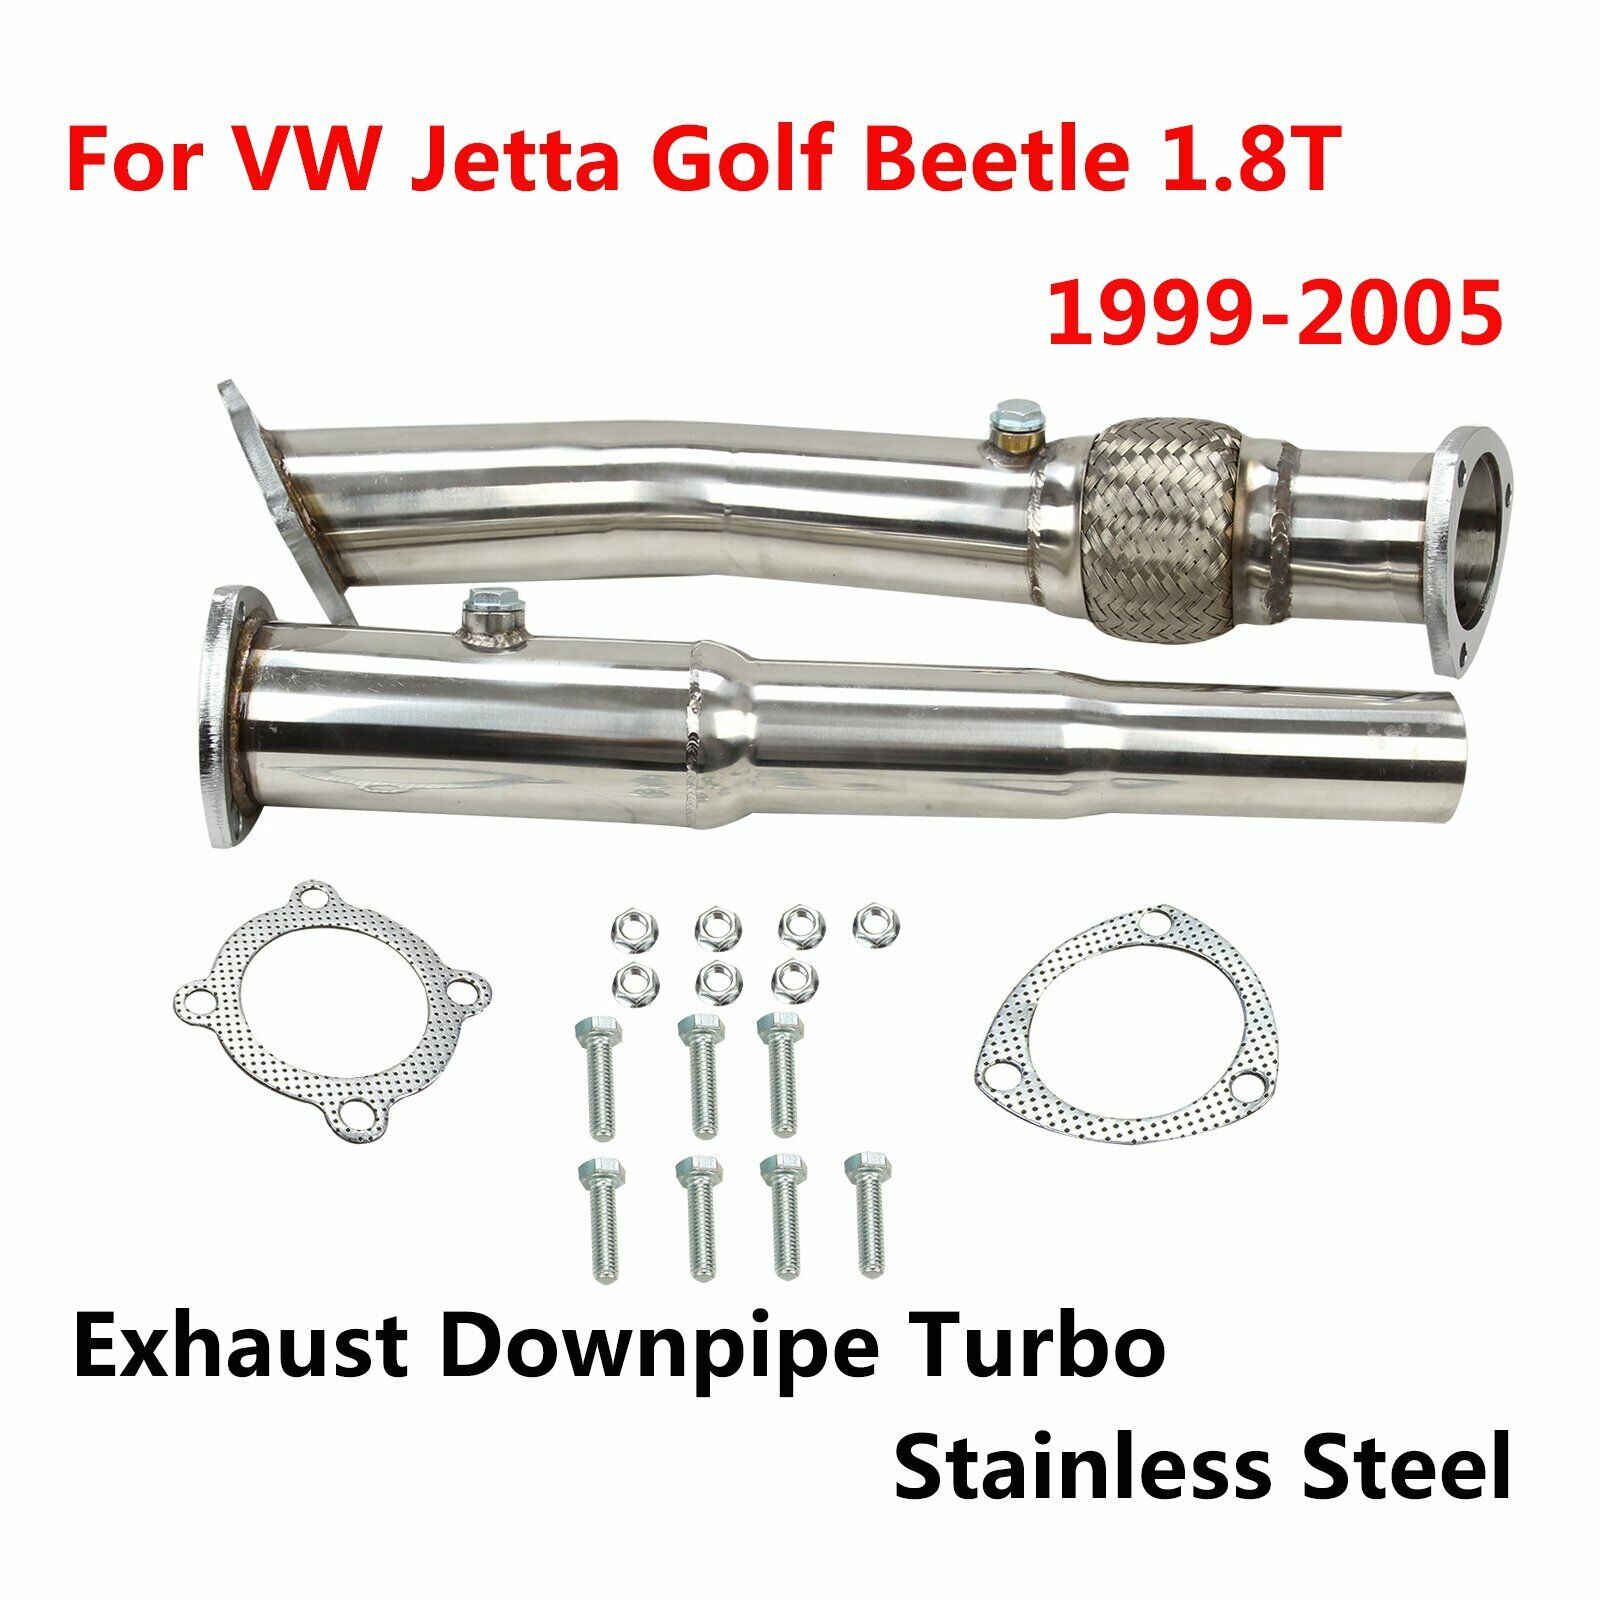 For 99-05 VW Jetta Golf Beetle 1.8T Exhaust Pipe Turbo Stainless